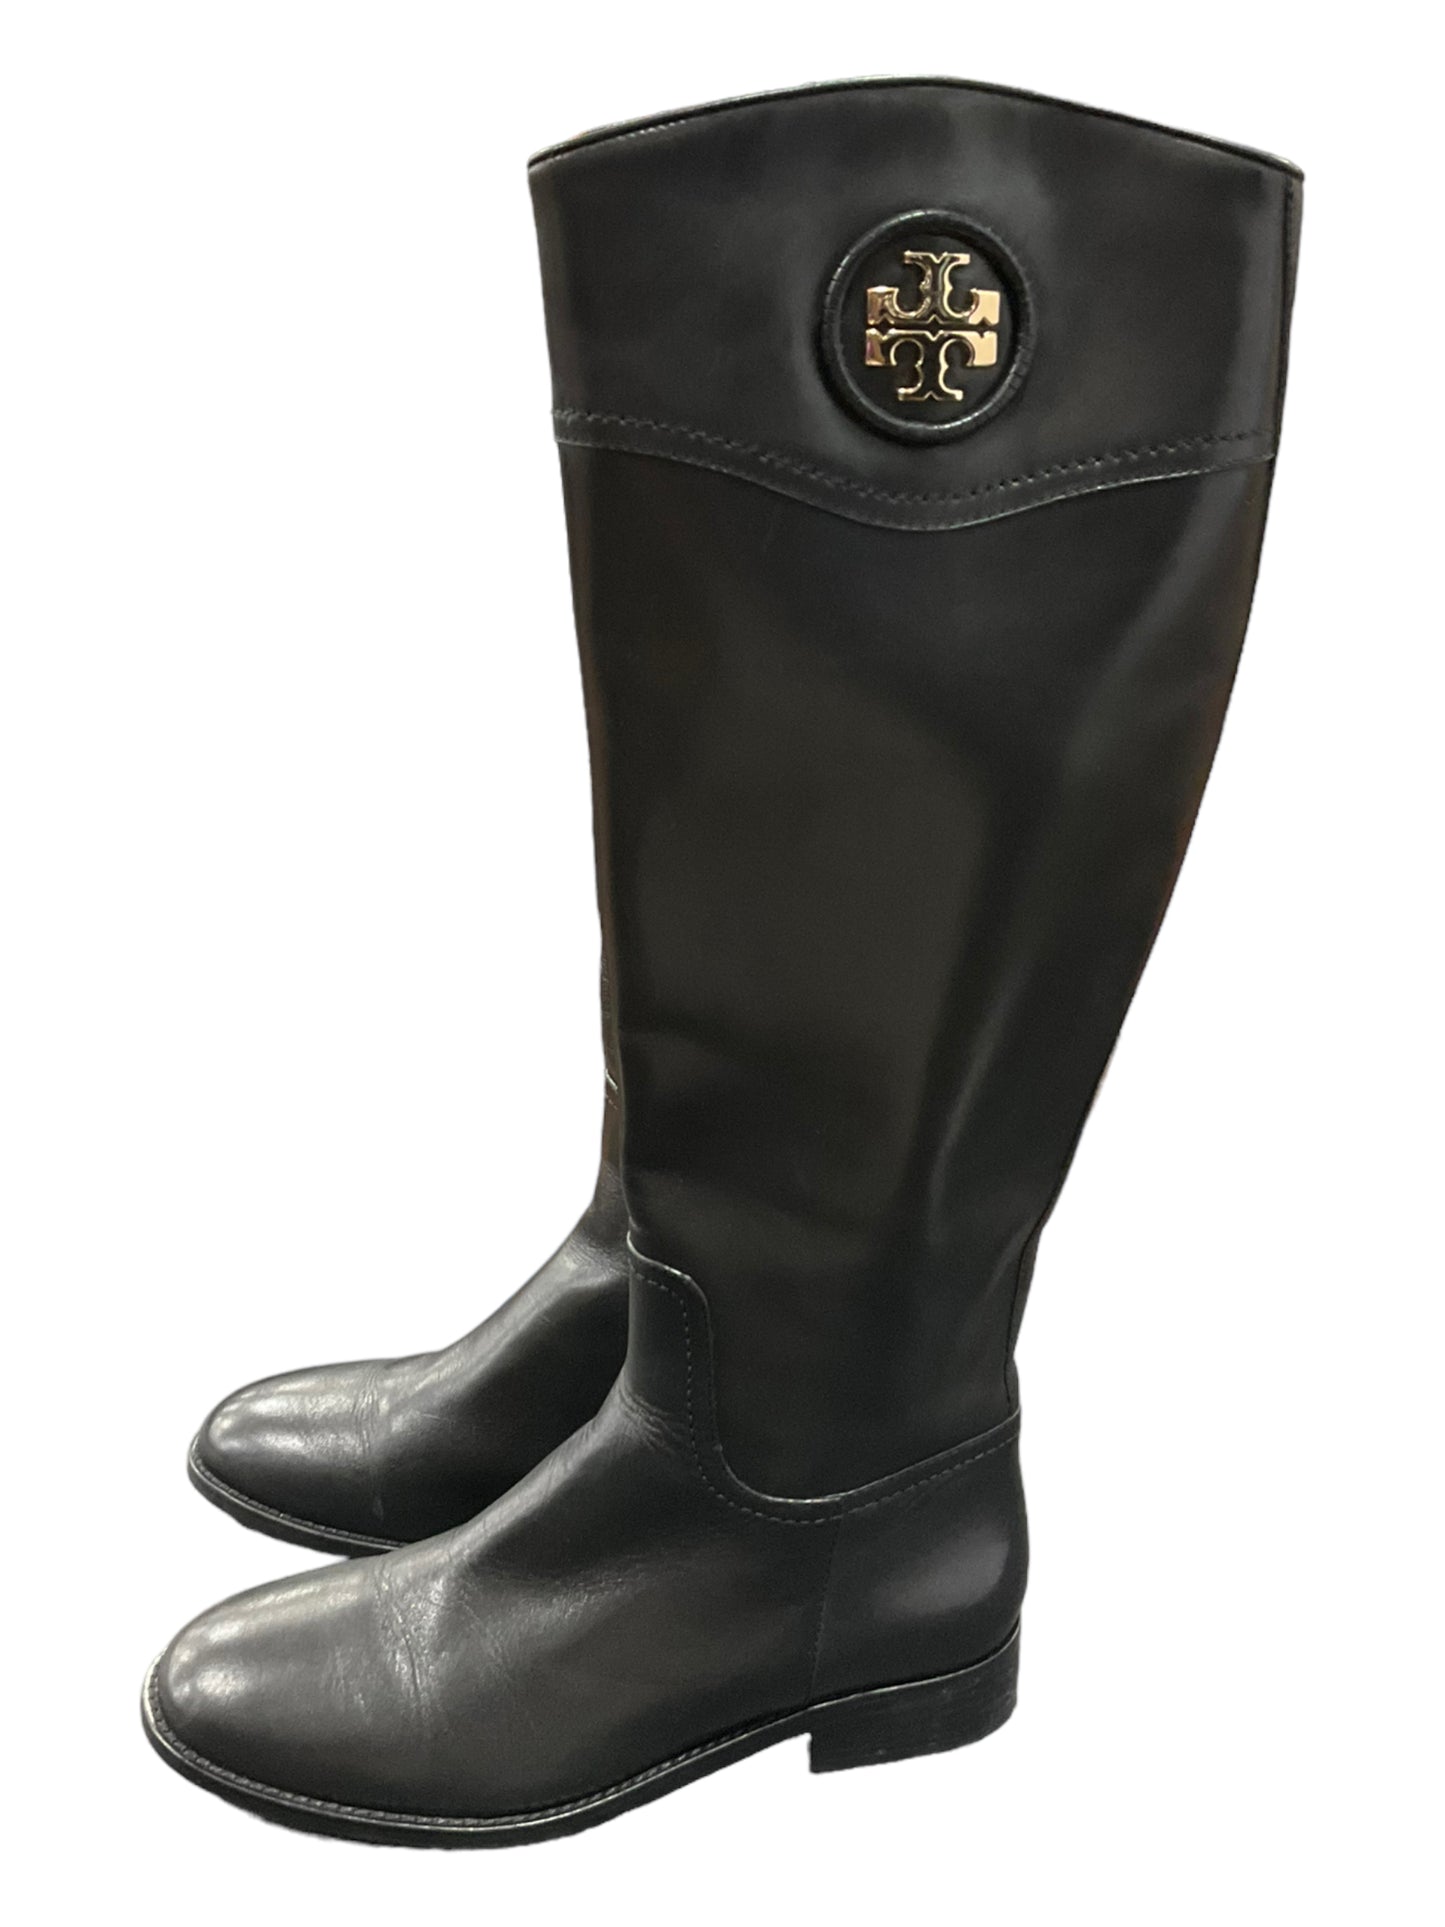 Boots Designer By Tory Burch  Size: 7.5